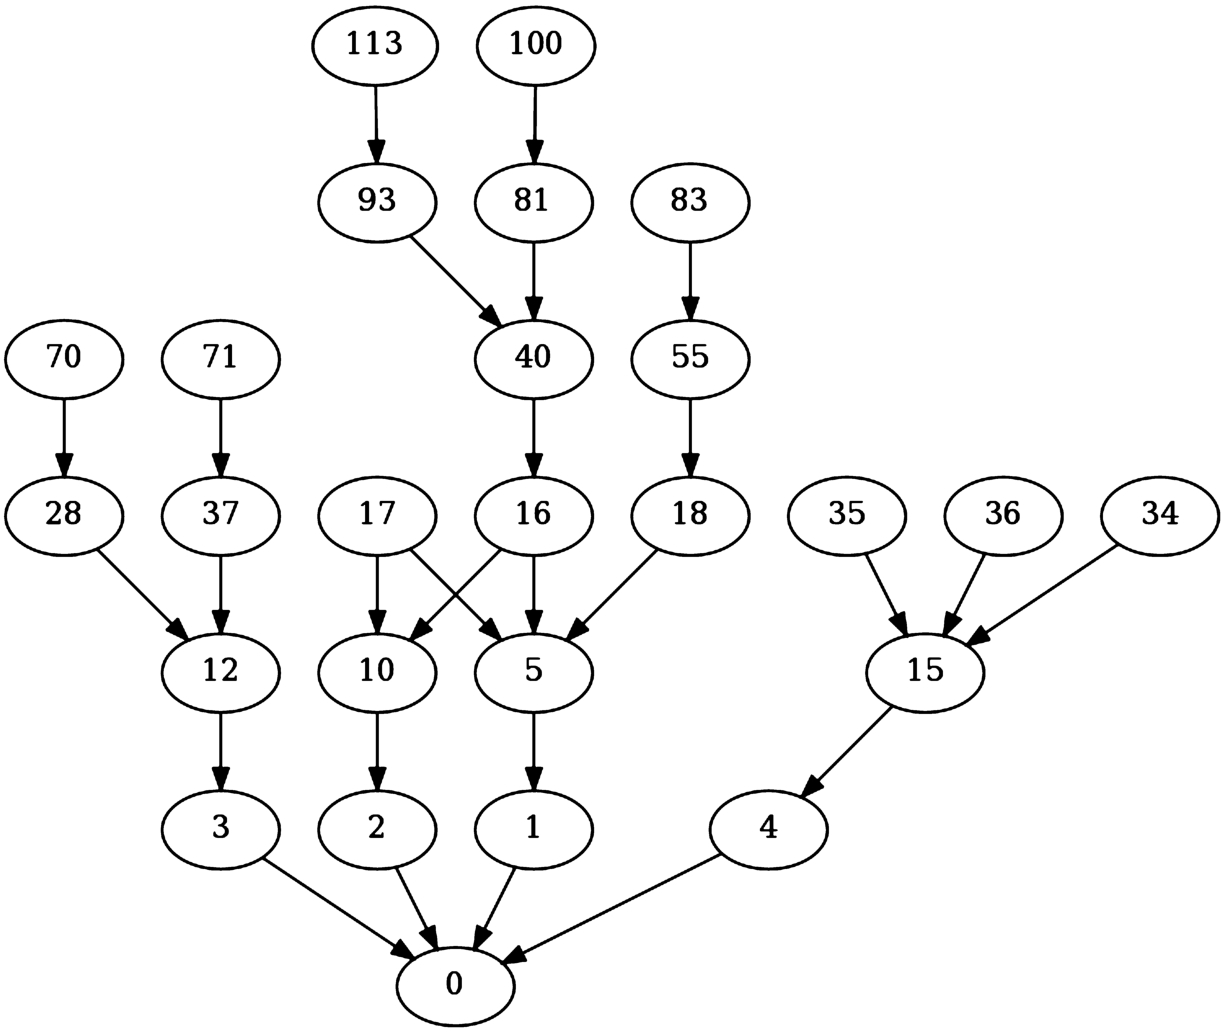 A subgraph of the argument graph in favour of maintaining student fees (see data appendix) induced by the dialogue from Table 1.